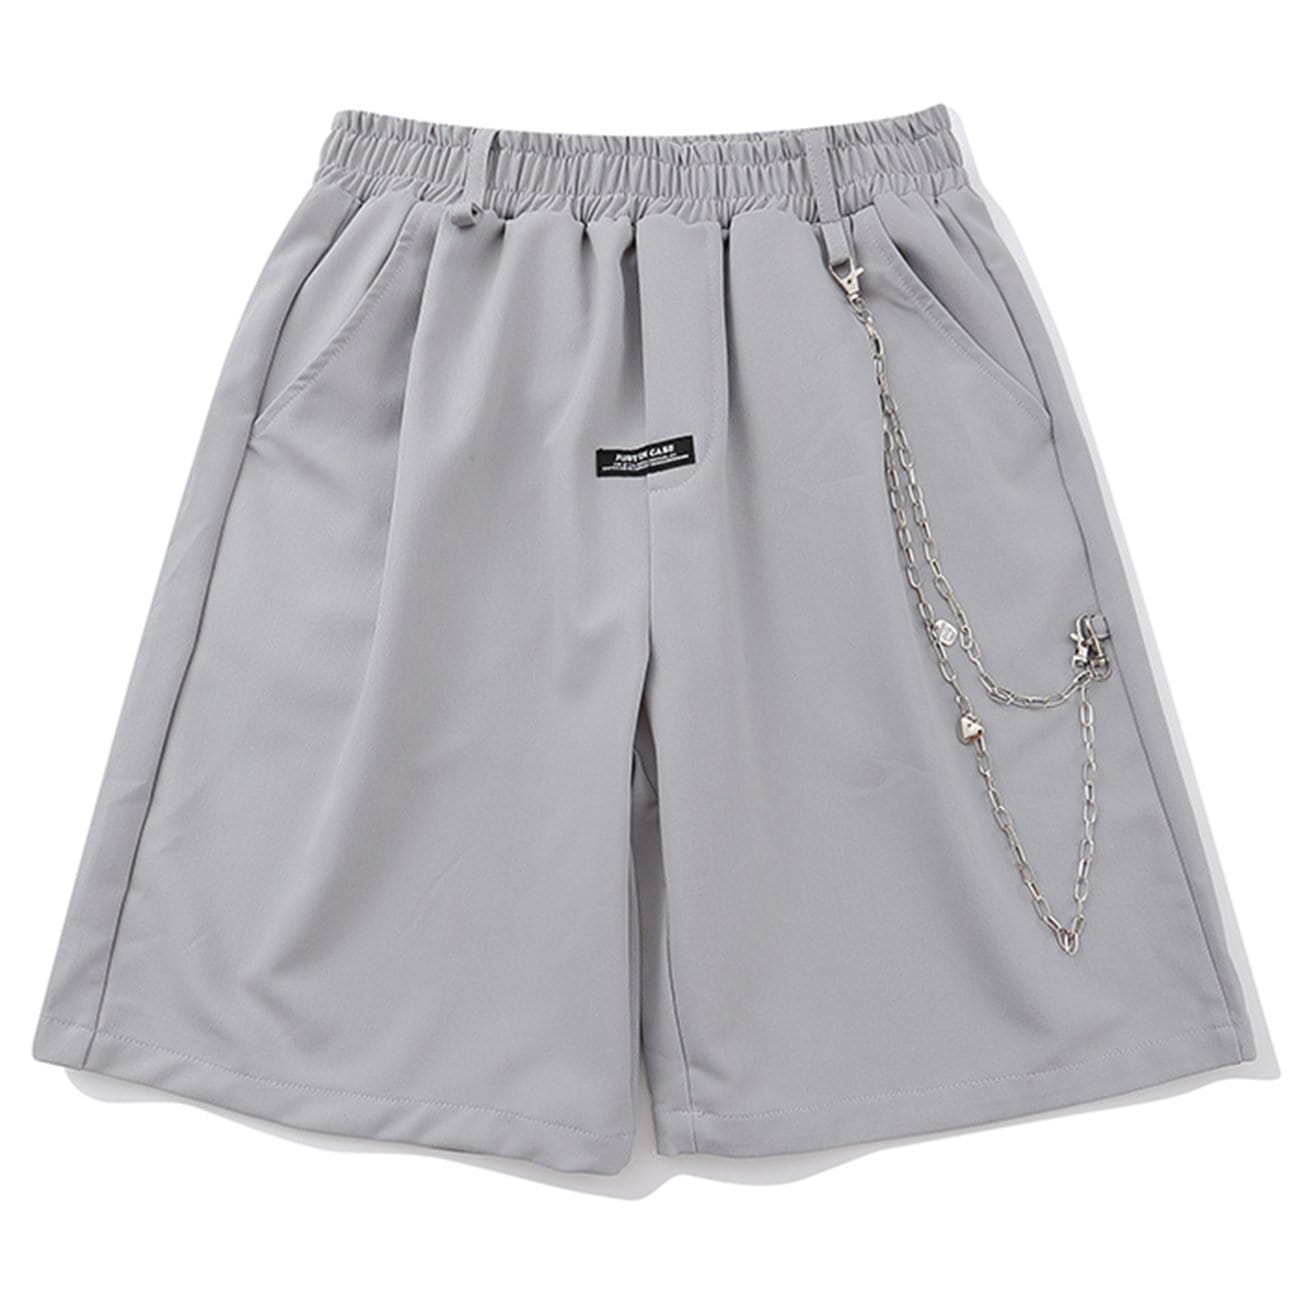 Functional Chain Shorts